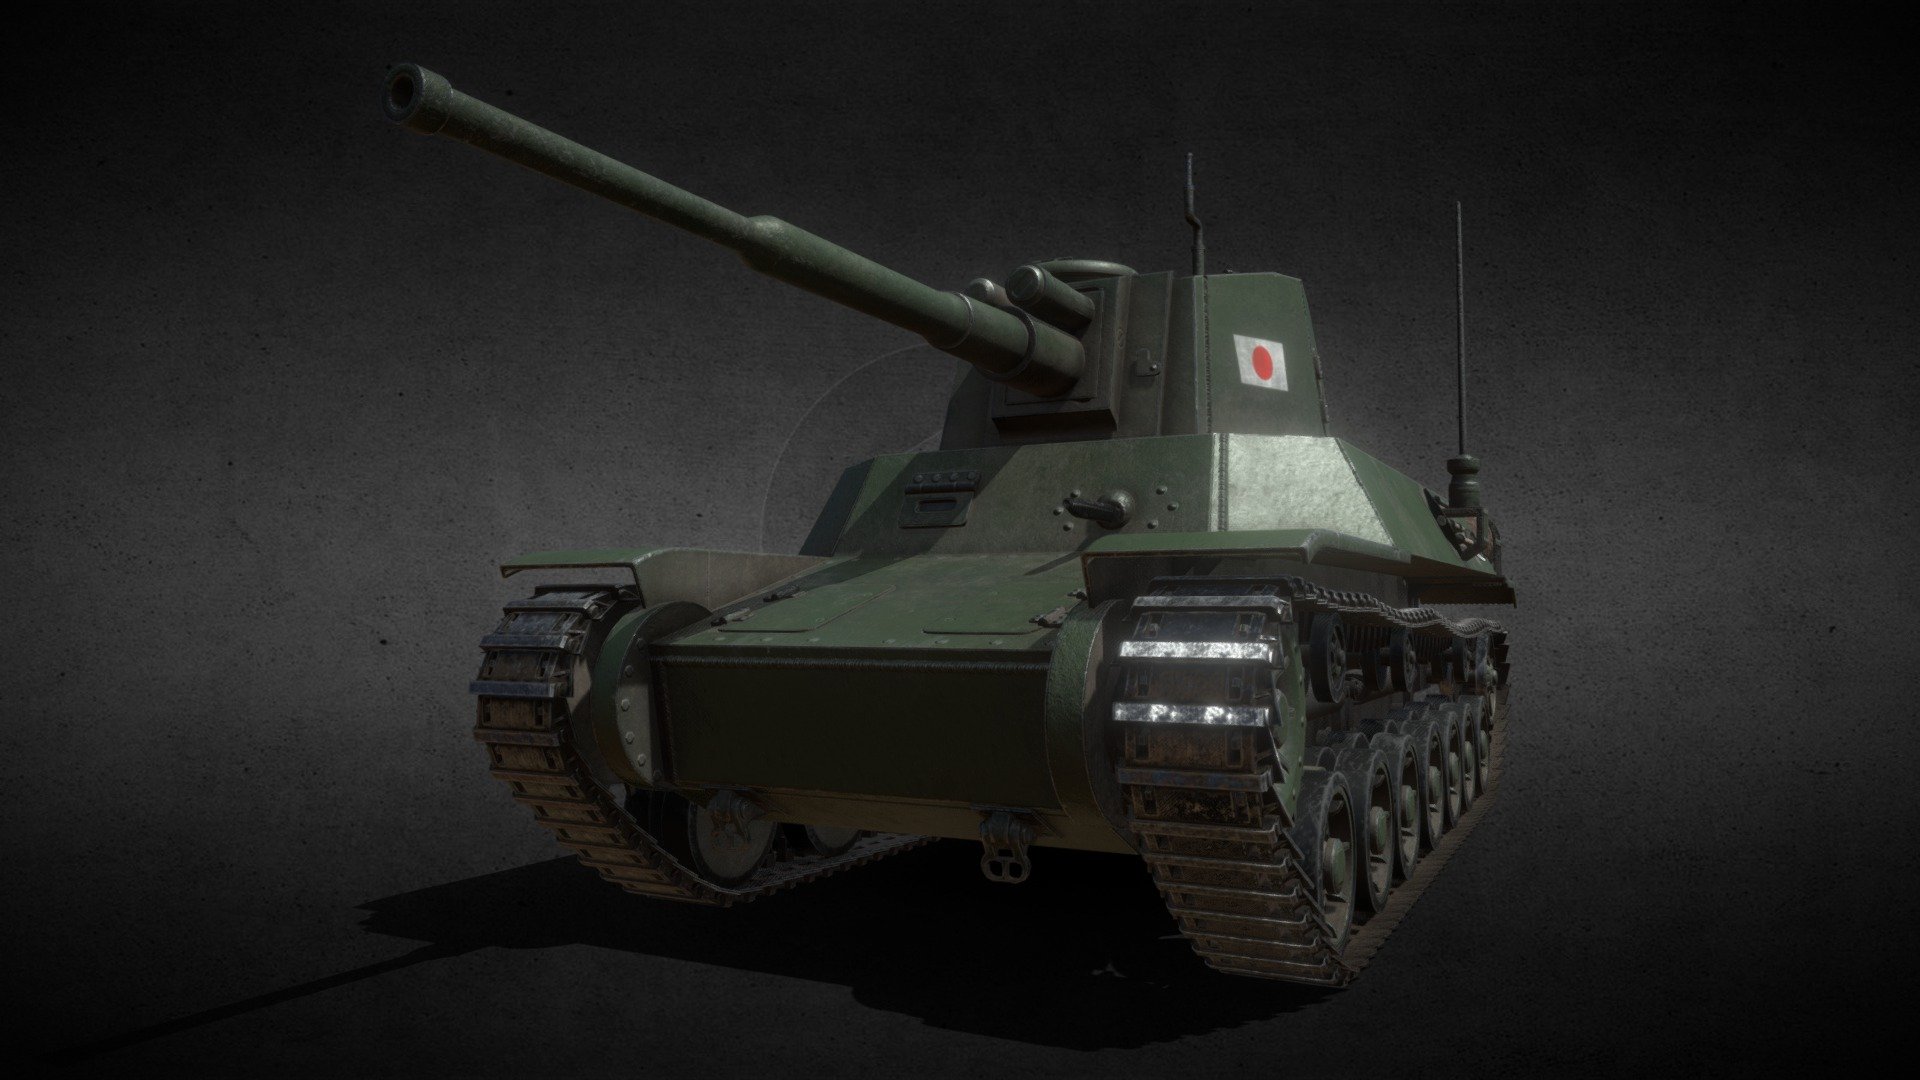 Ready to use Type 4 Chi-To 3d model

Type 4 Chi-To was one of the last medium tanks developed by the Imperial Japanese Army near the end of the WW2.
It was intended to be the succesor of the Type 97 Shinhoto Chi-Ha medium tank (3D model also avalible).
Due to the industrial and material shortages, only a few chassis were build and only 2 units were completed neither of which saw combat.
It was the most advanced World War II era Japanese tank to reach the production stage.

Green paint variant.

Ready to use in games or renders.

More Japanese WW II models in the collection: https://skfb.ly/oyoDN

More Tanks and Parts models in the collection: https://skfb.ly/oyoDV

More cheap or free military models in the collection: https://skfb.ly/ooYNo

4096x4096 textures:


albedo
roughness
metalness
normal map
ambient occulusion map

modelled in Blender textured in Adobe Substance 3D Painter - Type 4 Chi-To (IJA Medium Tank) - Buy Royalty Free 3D model by AdamKozakGrafika 3d model